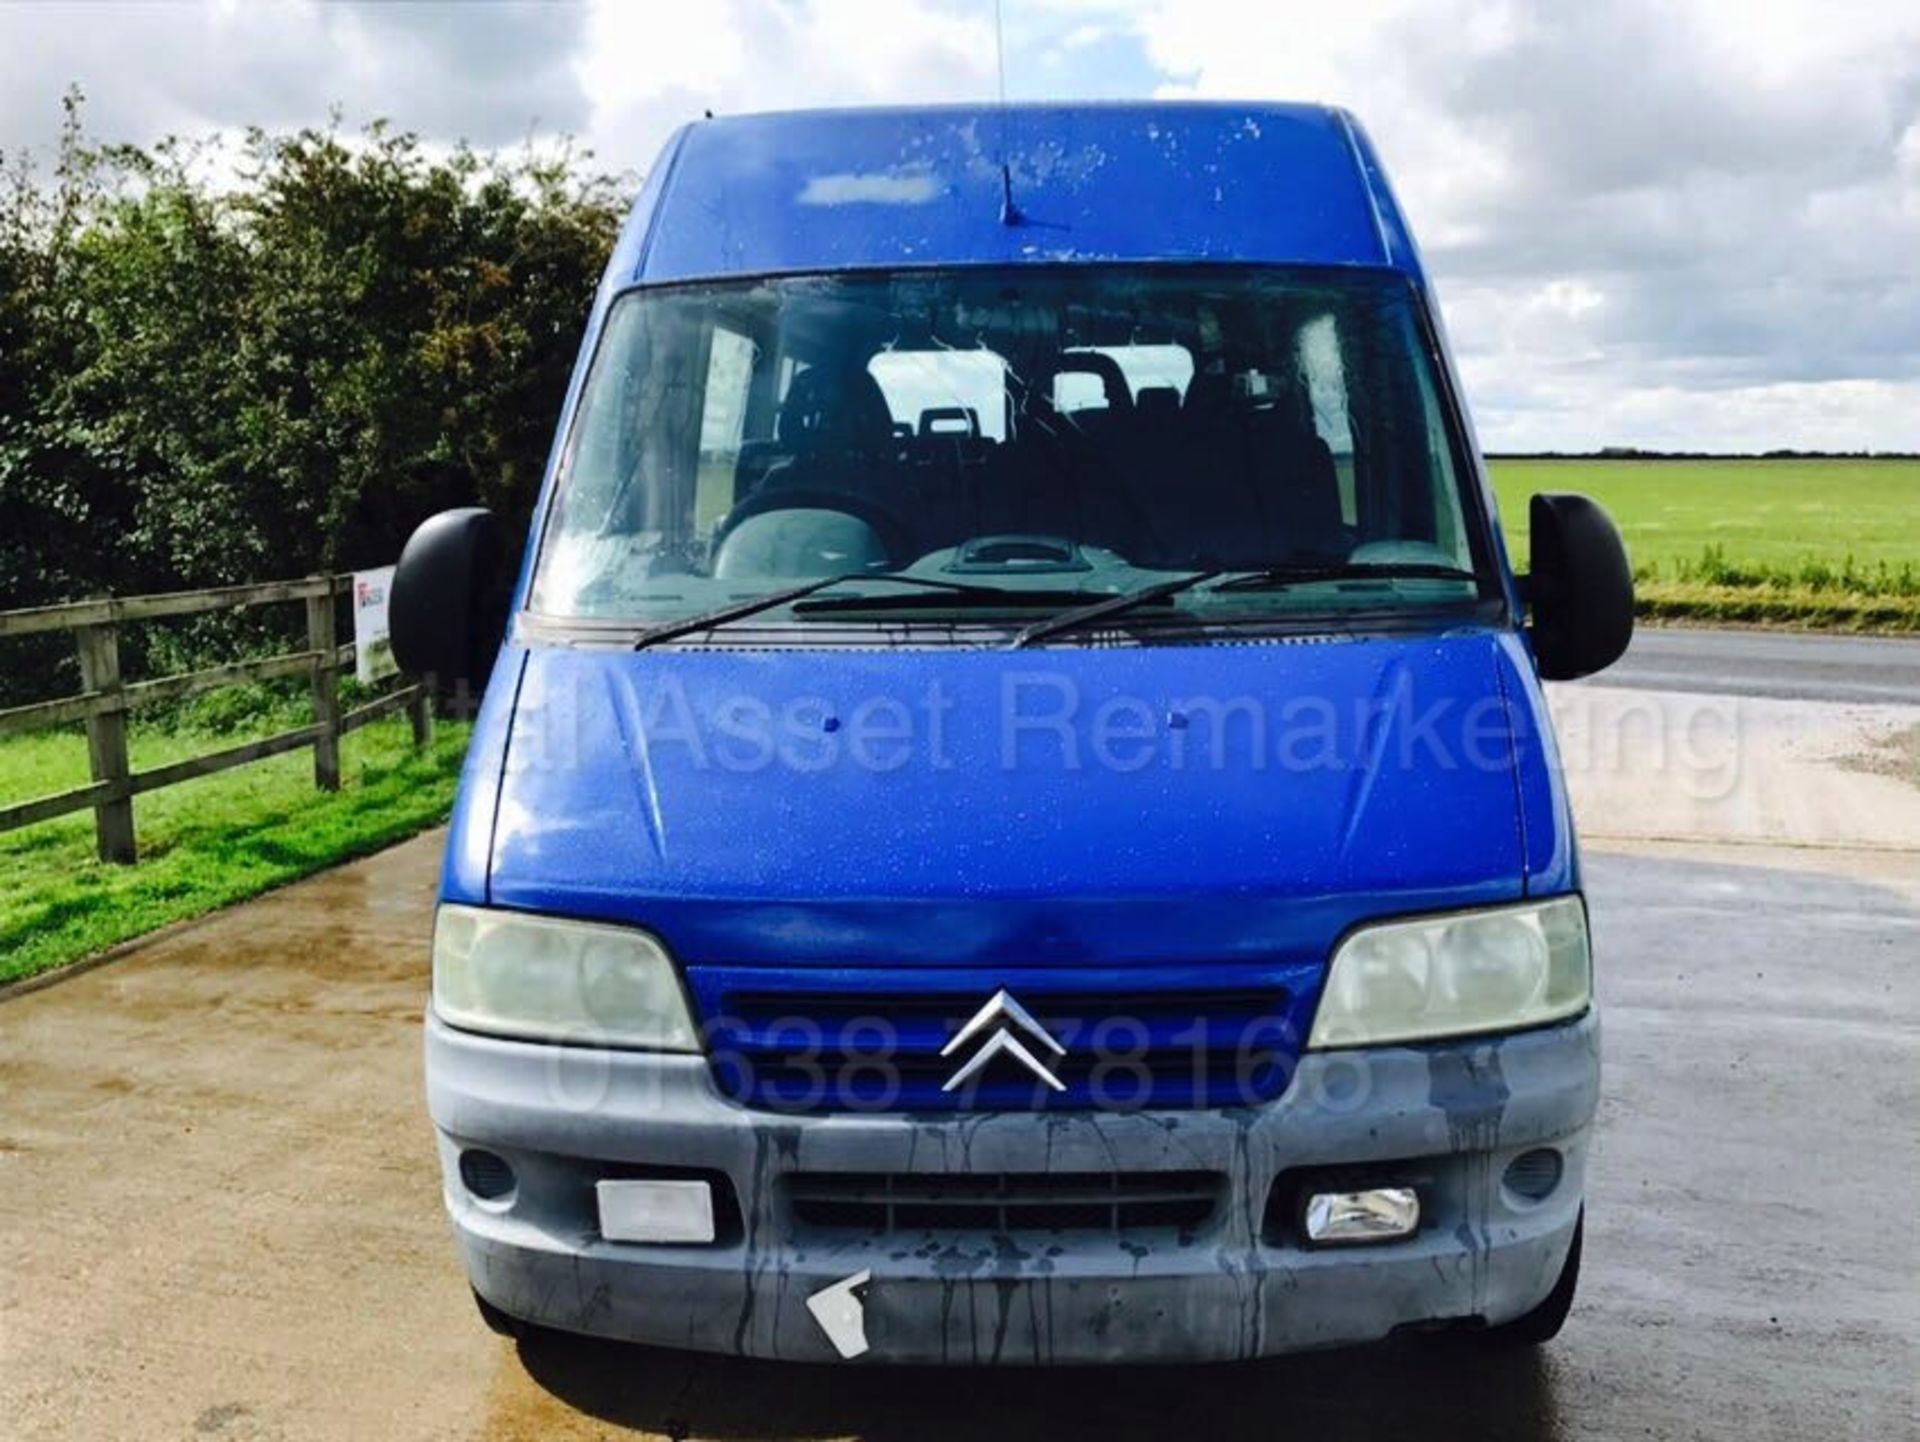 (On Sale) CITROEN RELAY 'LWB HI-ROOF - 17 SEATER MINI-BUS' (2005) '2.2 HDI - 5 SPEED' (NO VAT) - Image 2 of 16